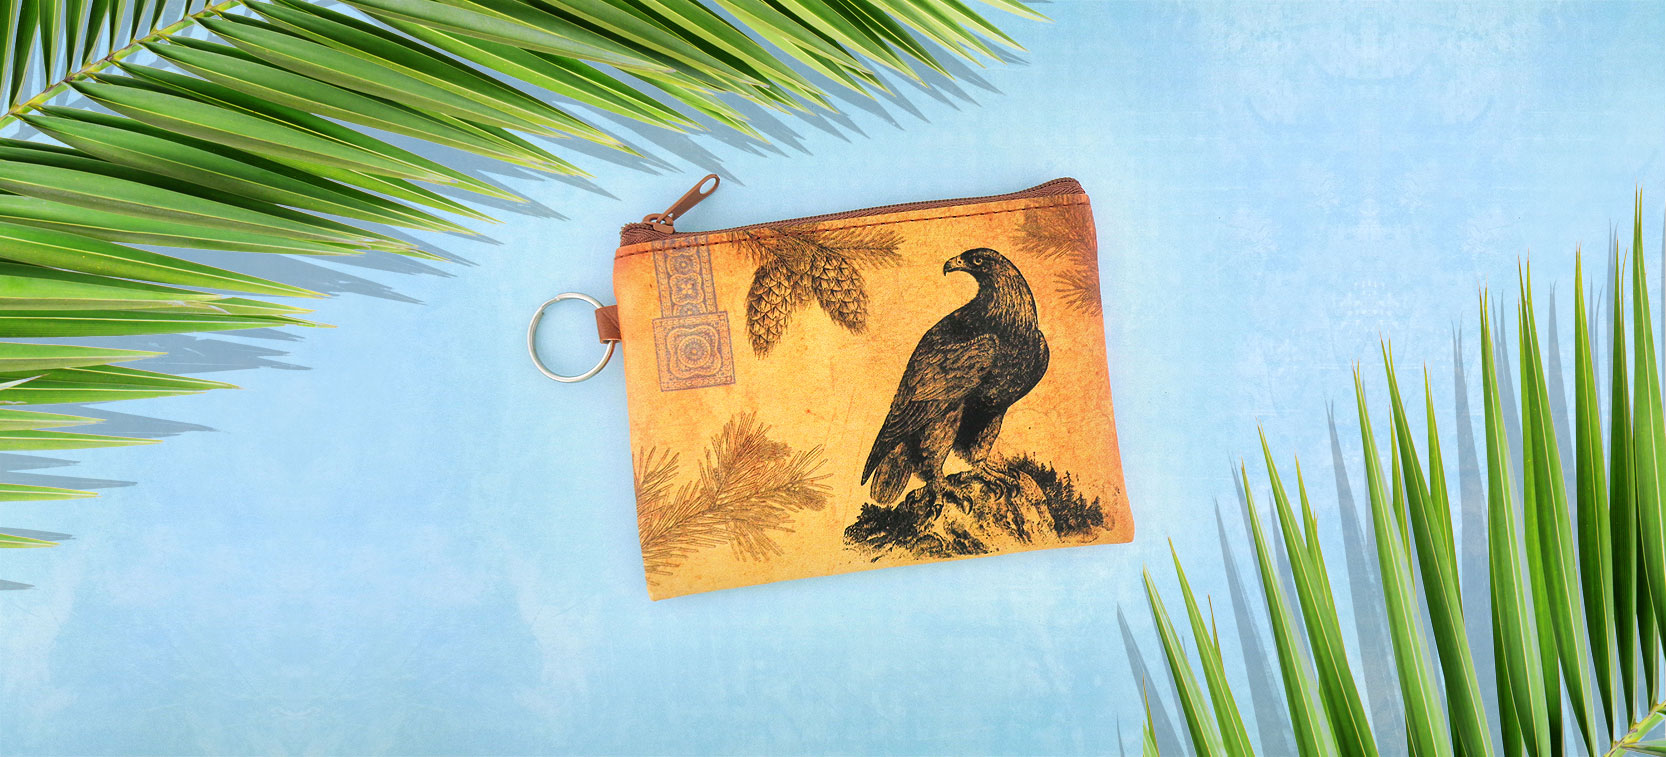 LAVISHY design and wholesale eagle themed vegan accessories and gfits to gift shops, boutiques and garden centers, botanical garden gift stores in Canada, USA and worldwide.